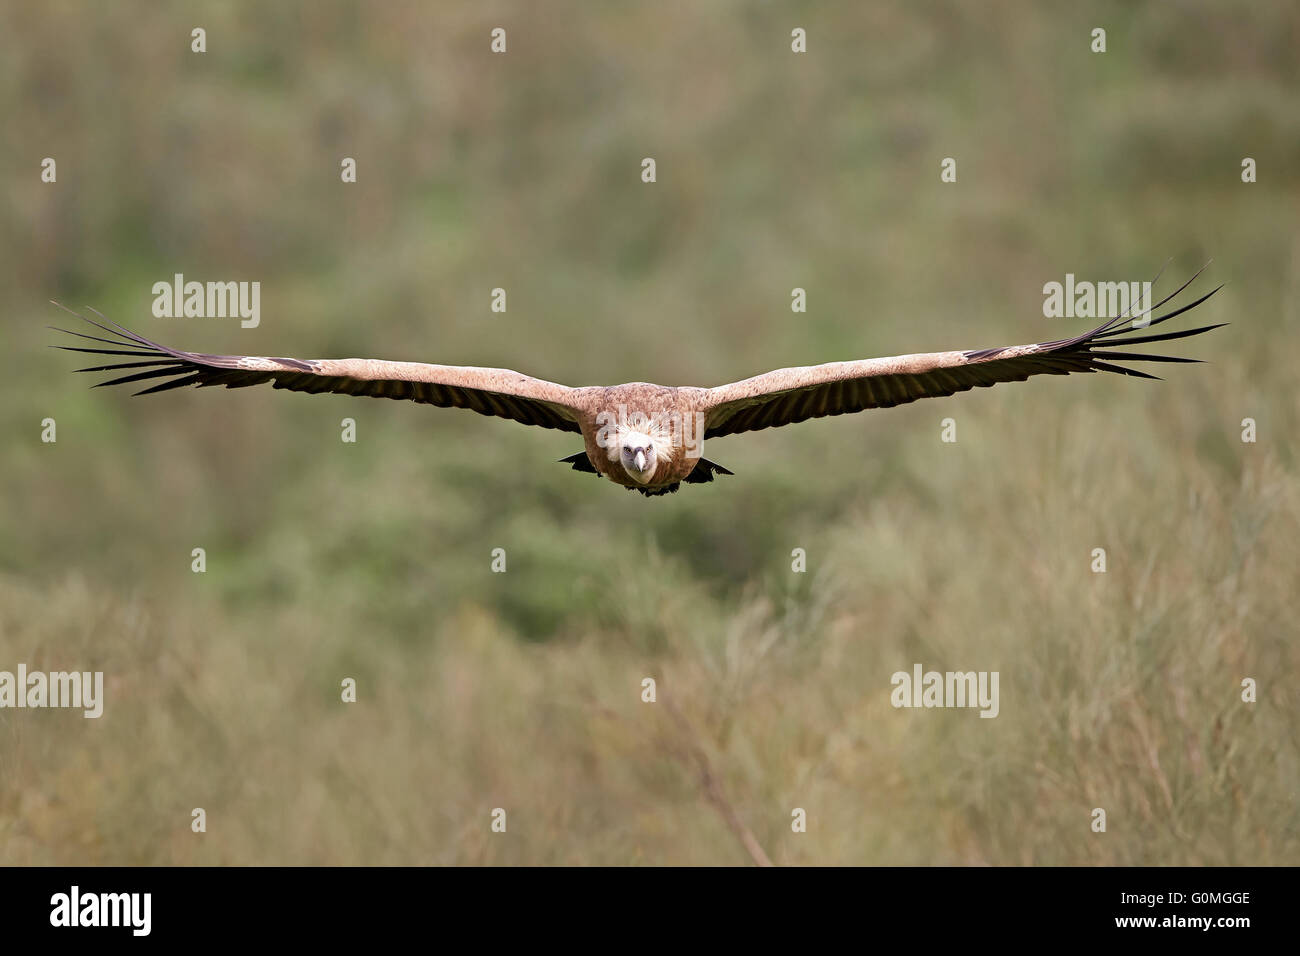 Griffon vulture in flight with vegetation in the background Stock Photo